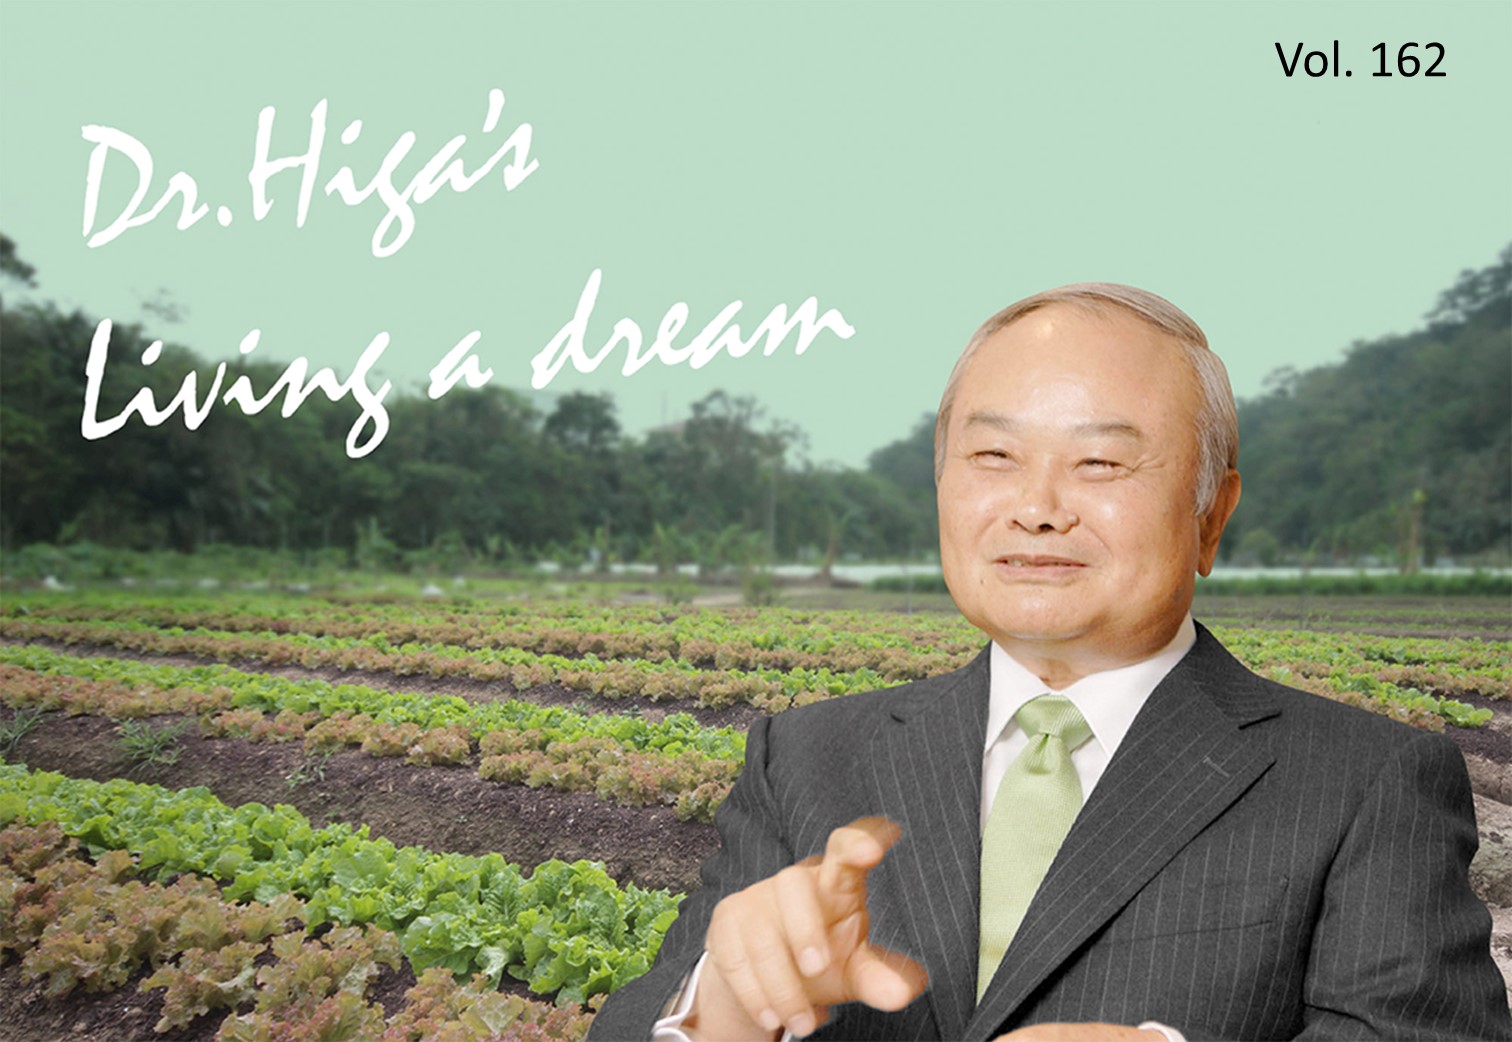 Dr. Higa's "Living a Drean": the latest article #162 is UP!!